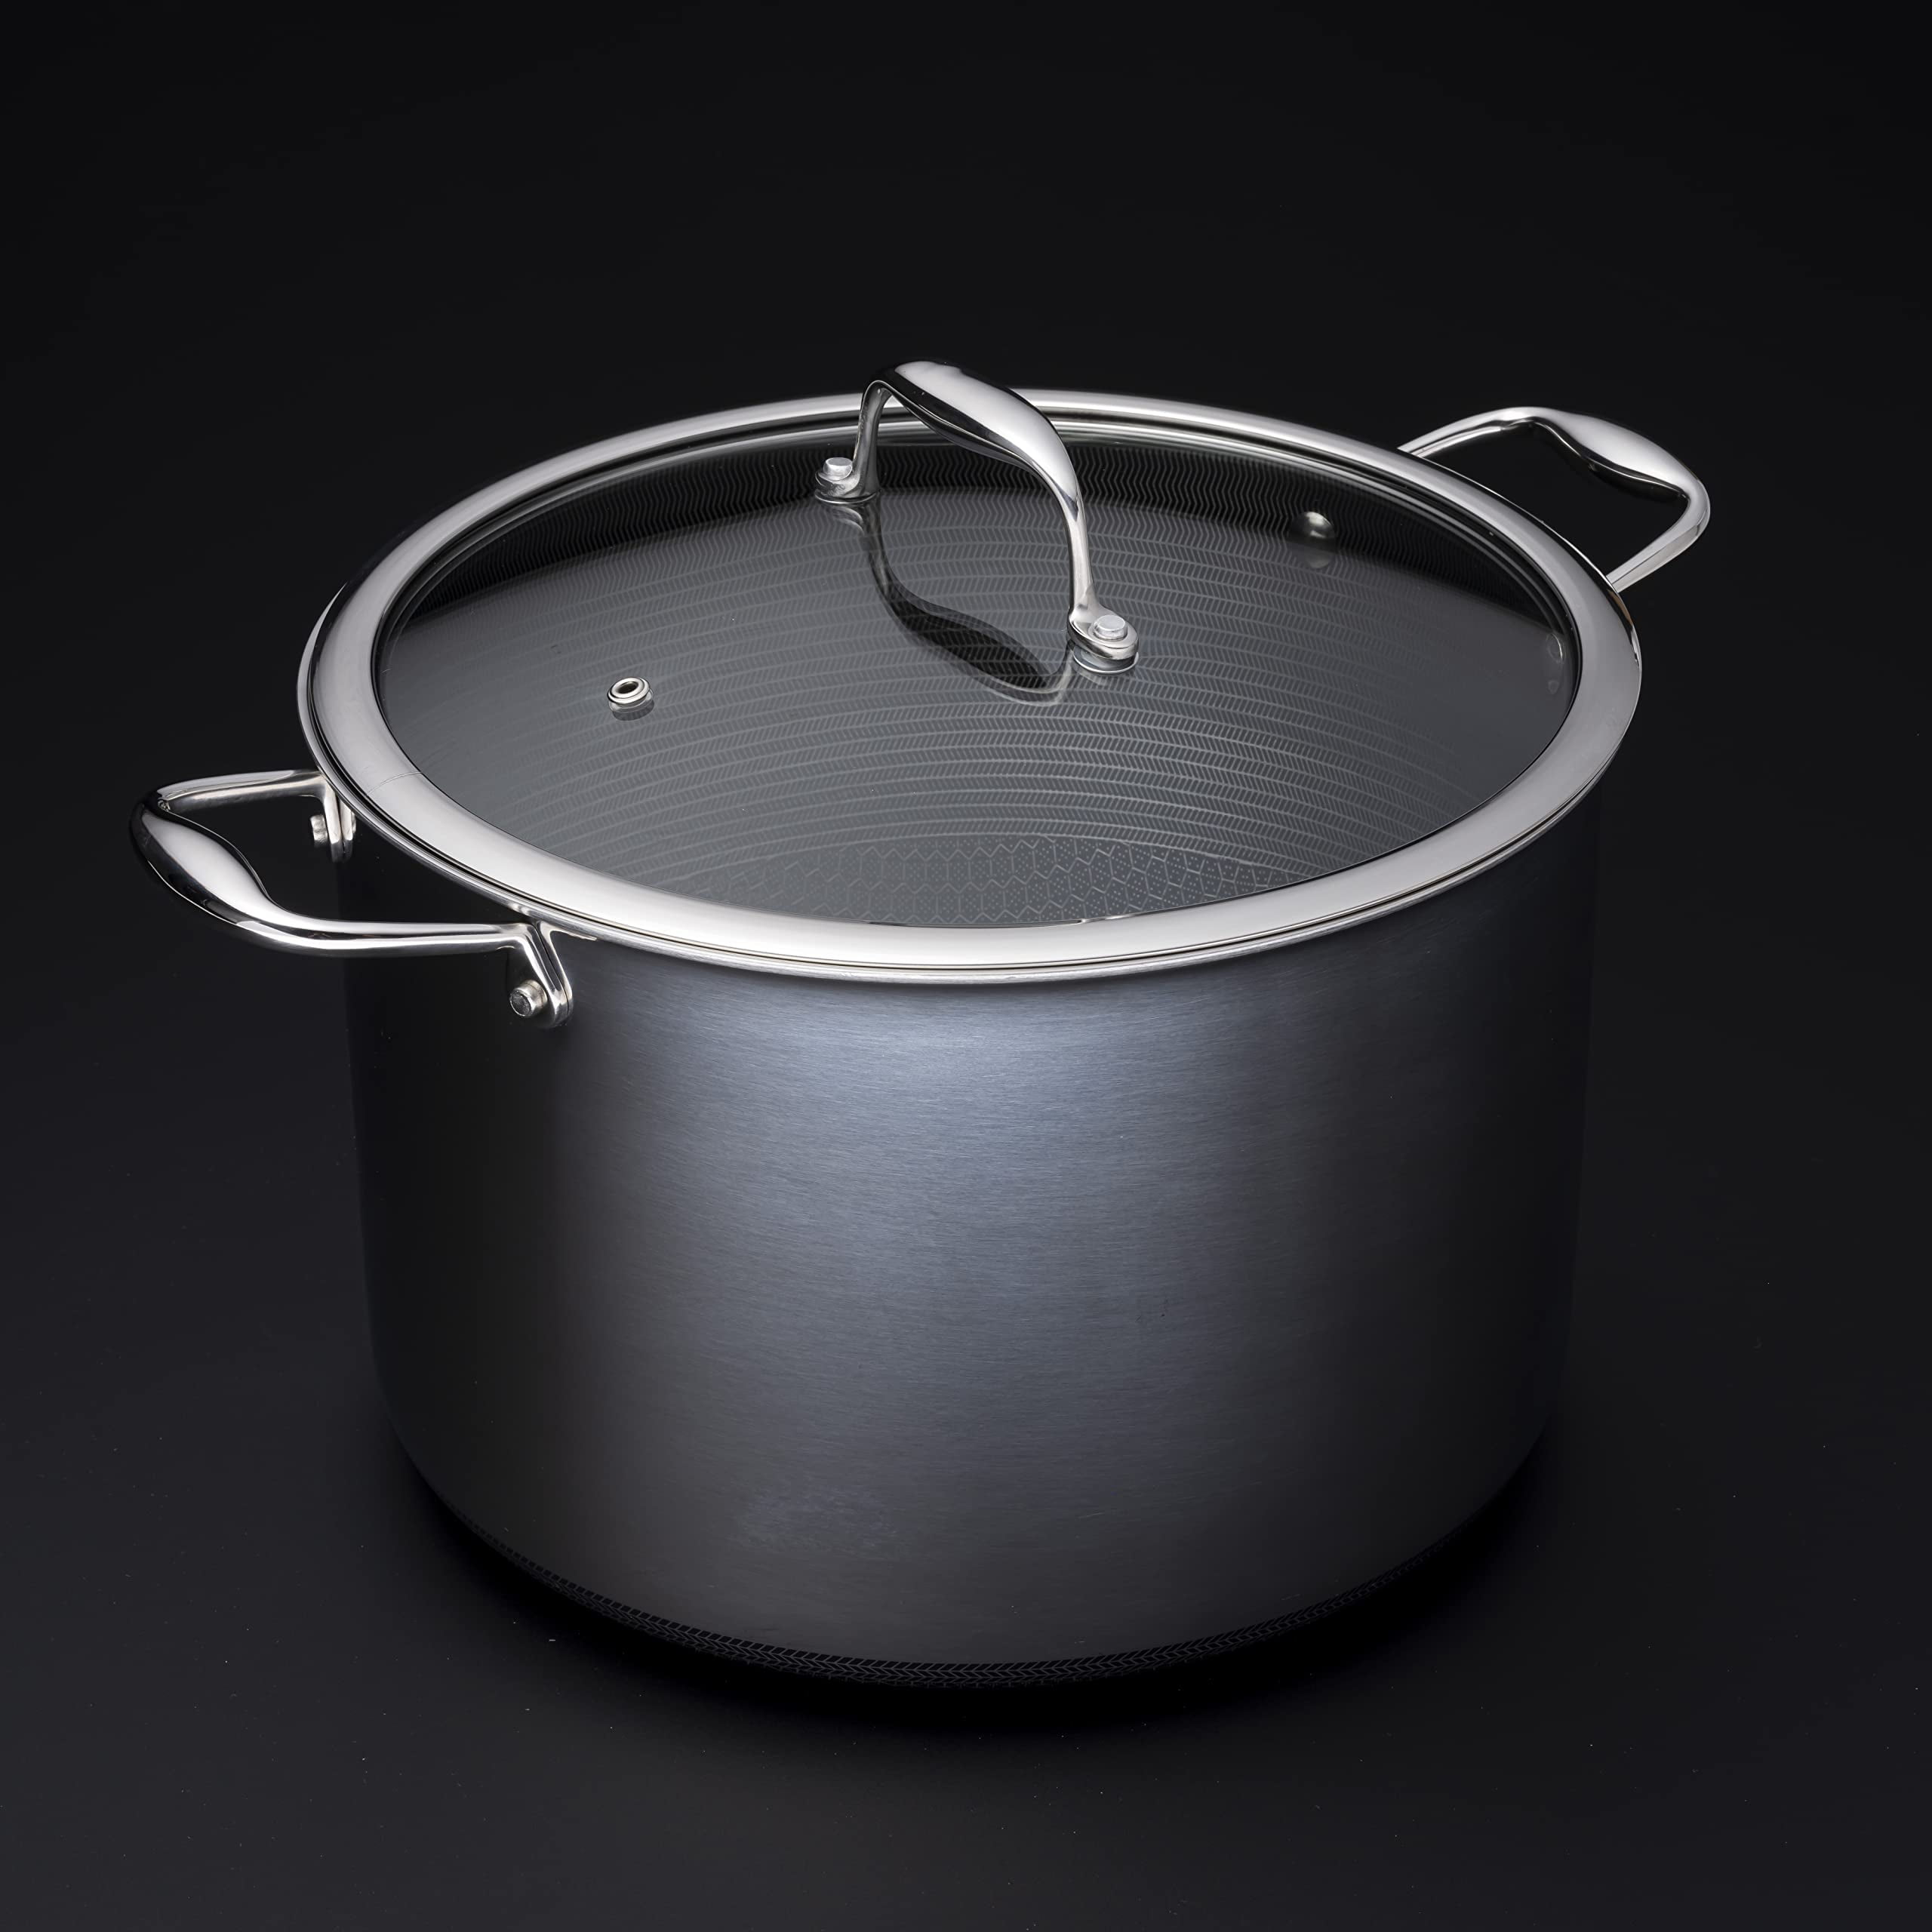 Stock up Your Kitchen With Some High Quality HexClad Cookware - Men's  Journal